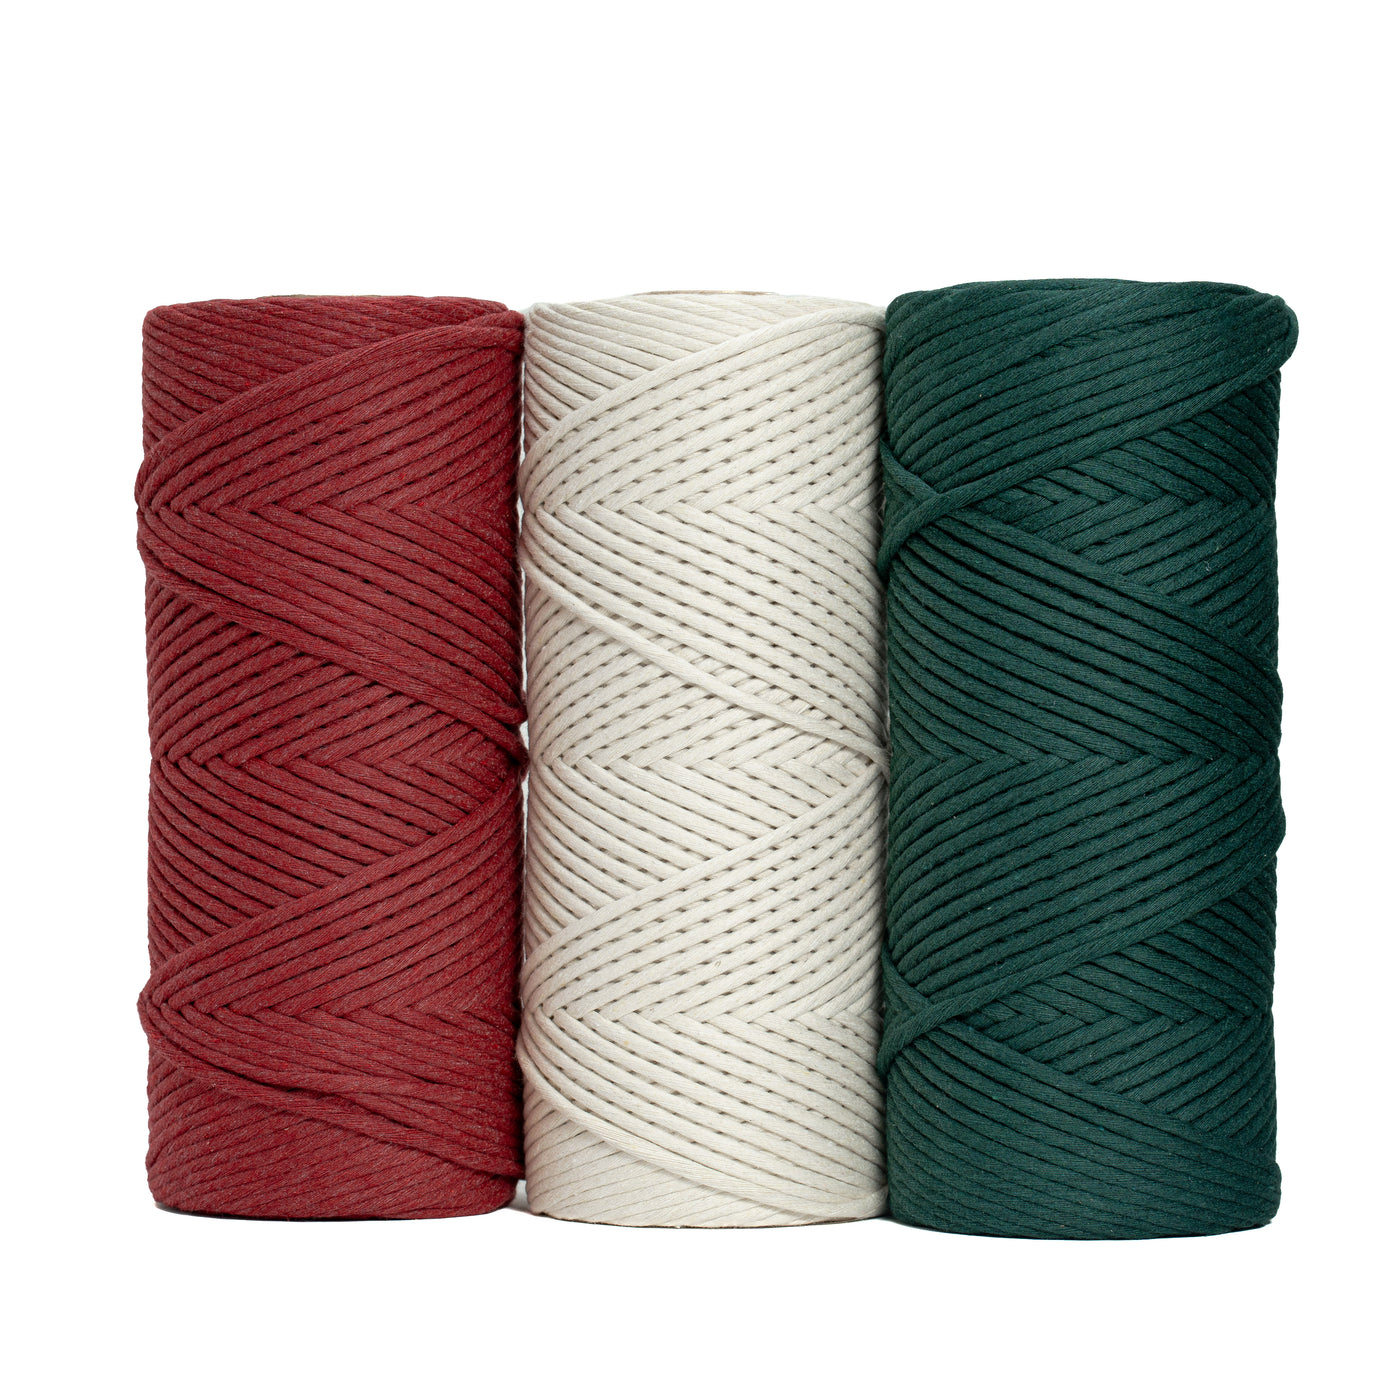 HOLIDAY BUNDLE - BERRY RED. OFF WHITE & FOREST GREEN - 720 ft